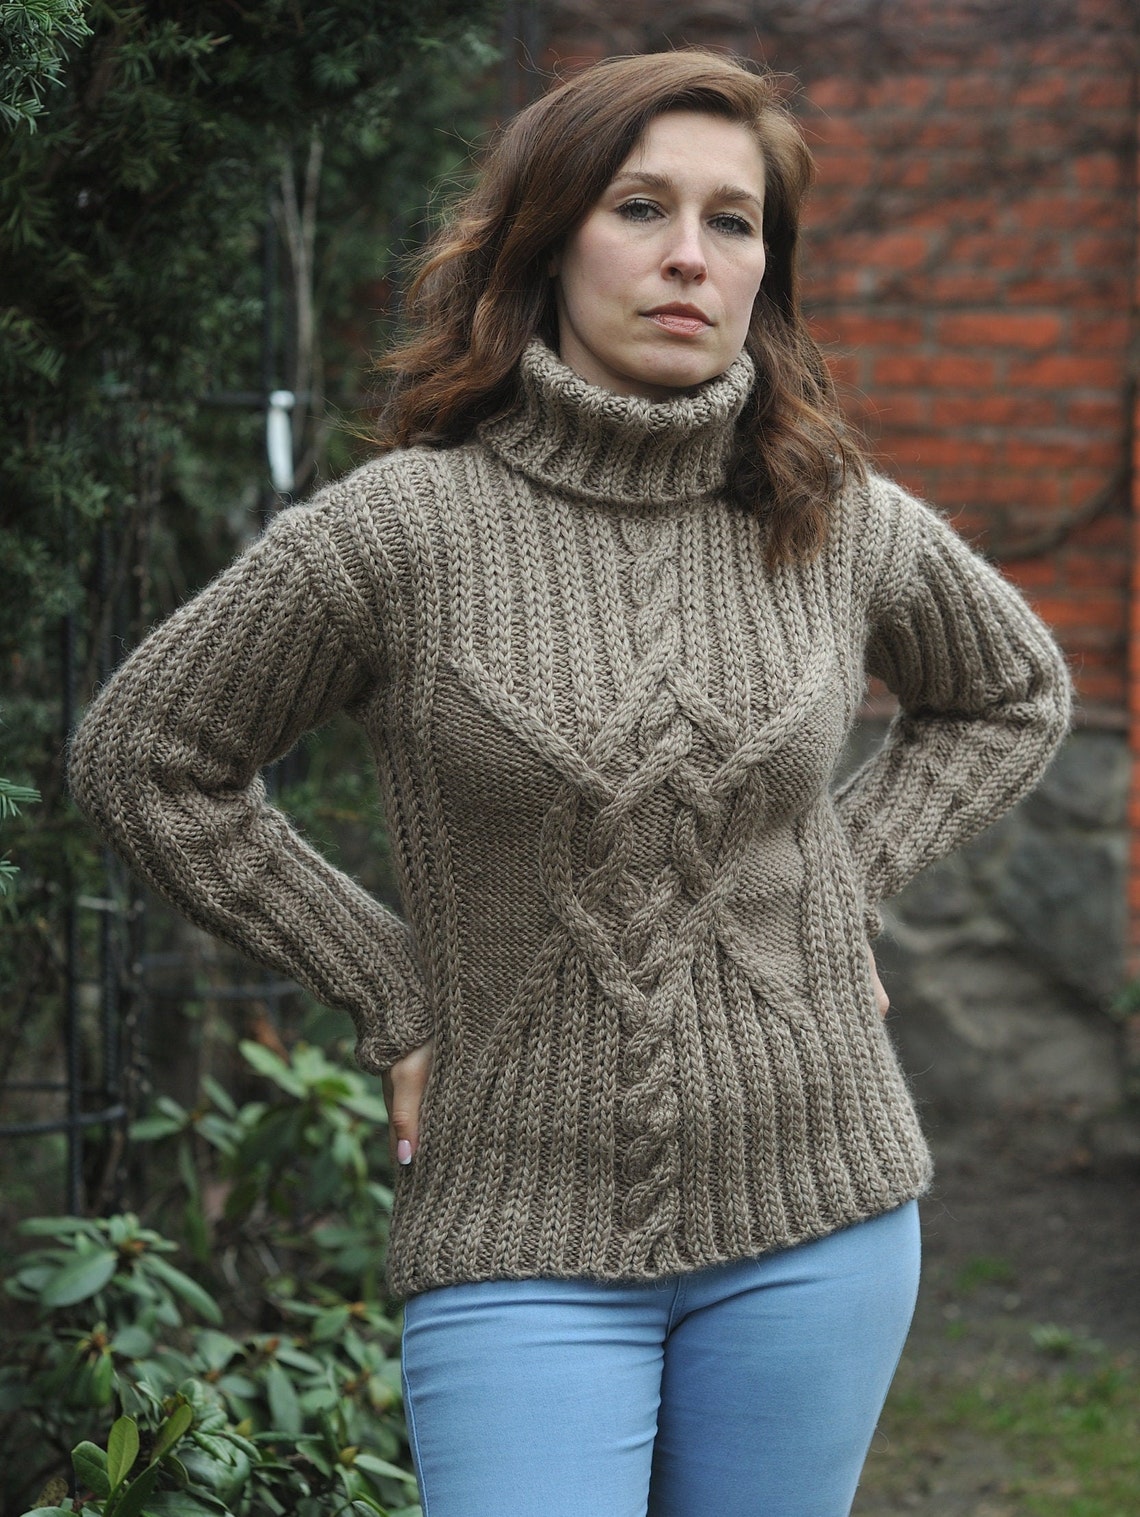 Women's Wool Sweater Cable Knitted Sweater Turtleneck - Etsy